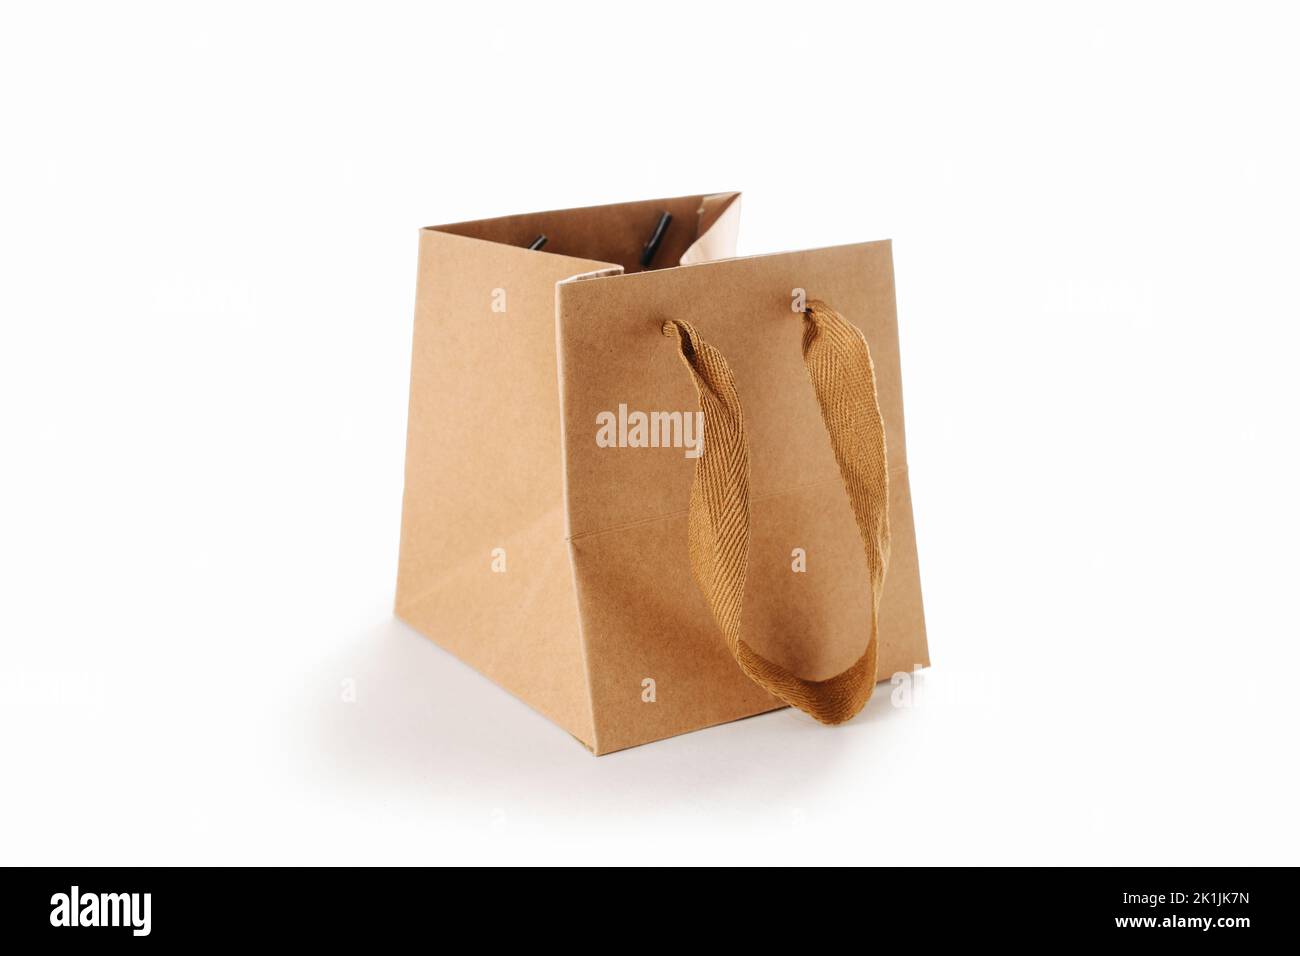 Square paper bag with cloth handles, partially folded. Over white background. Stock Photo